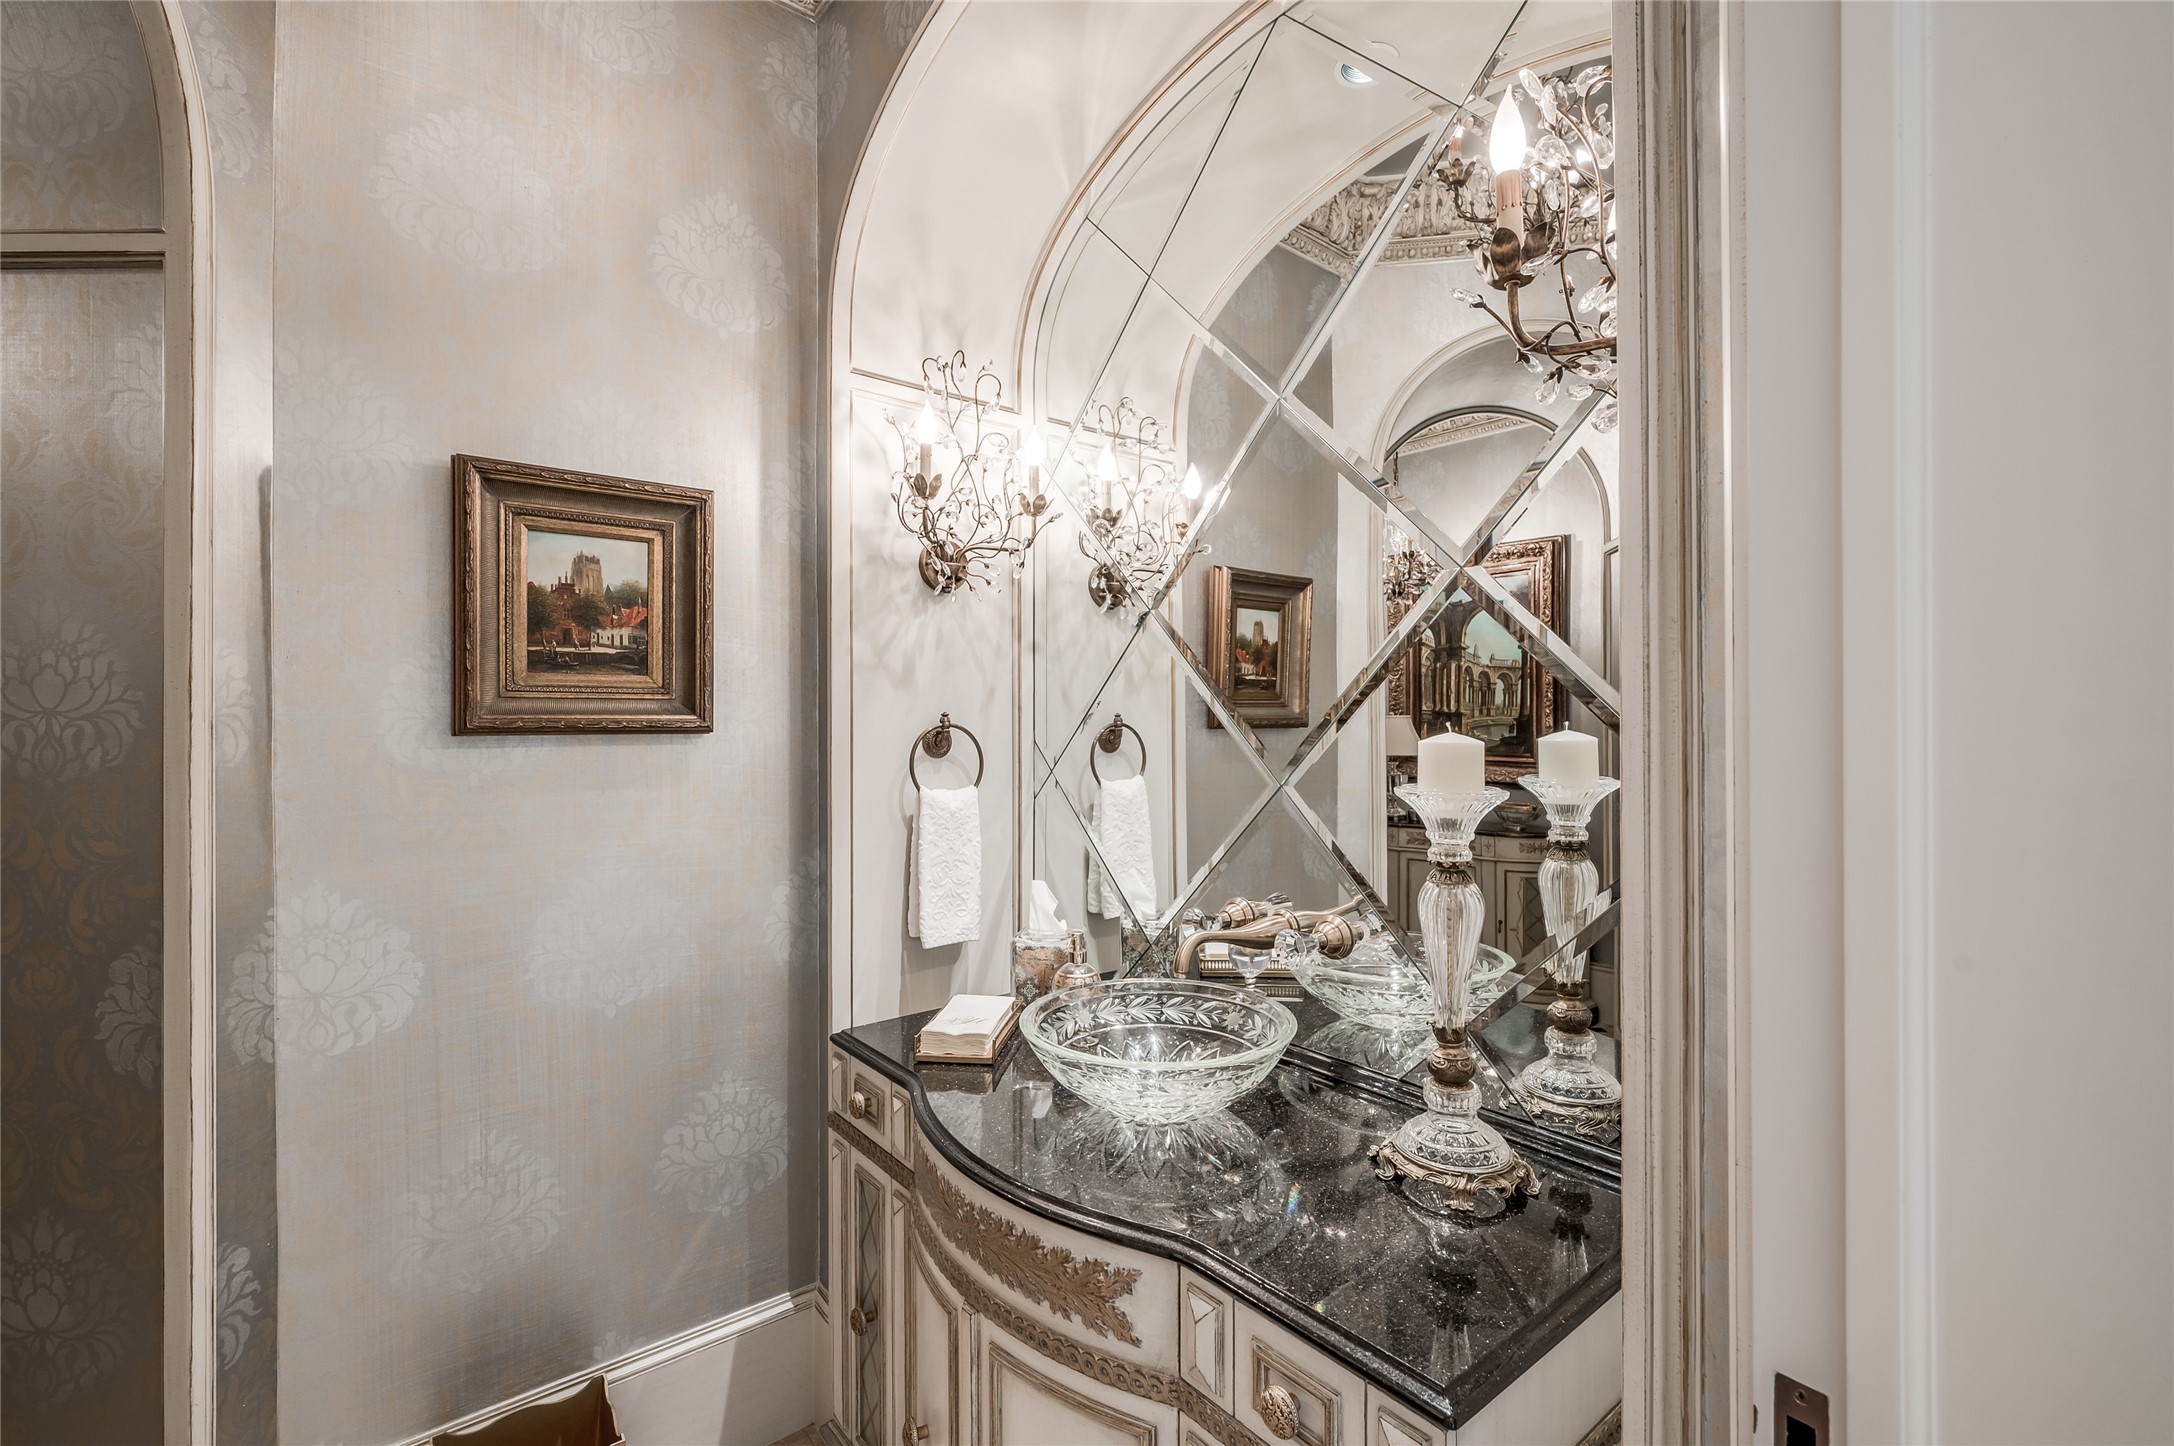 [Formal Powder Room]
The formal powder room has faux painted walls, a beveled, diamond-paneled mirror, and an etched glass vessel sink atop a bombe cabinet.